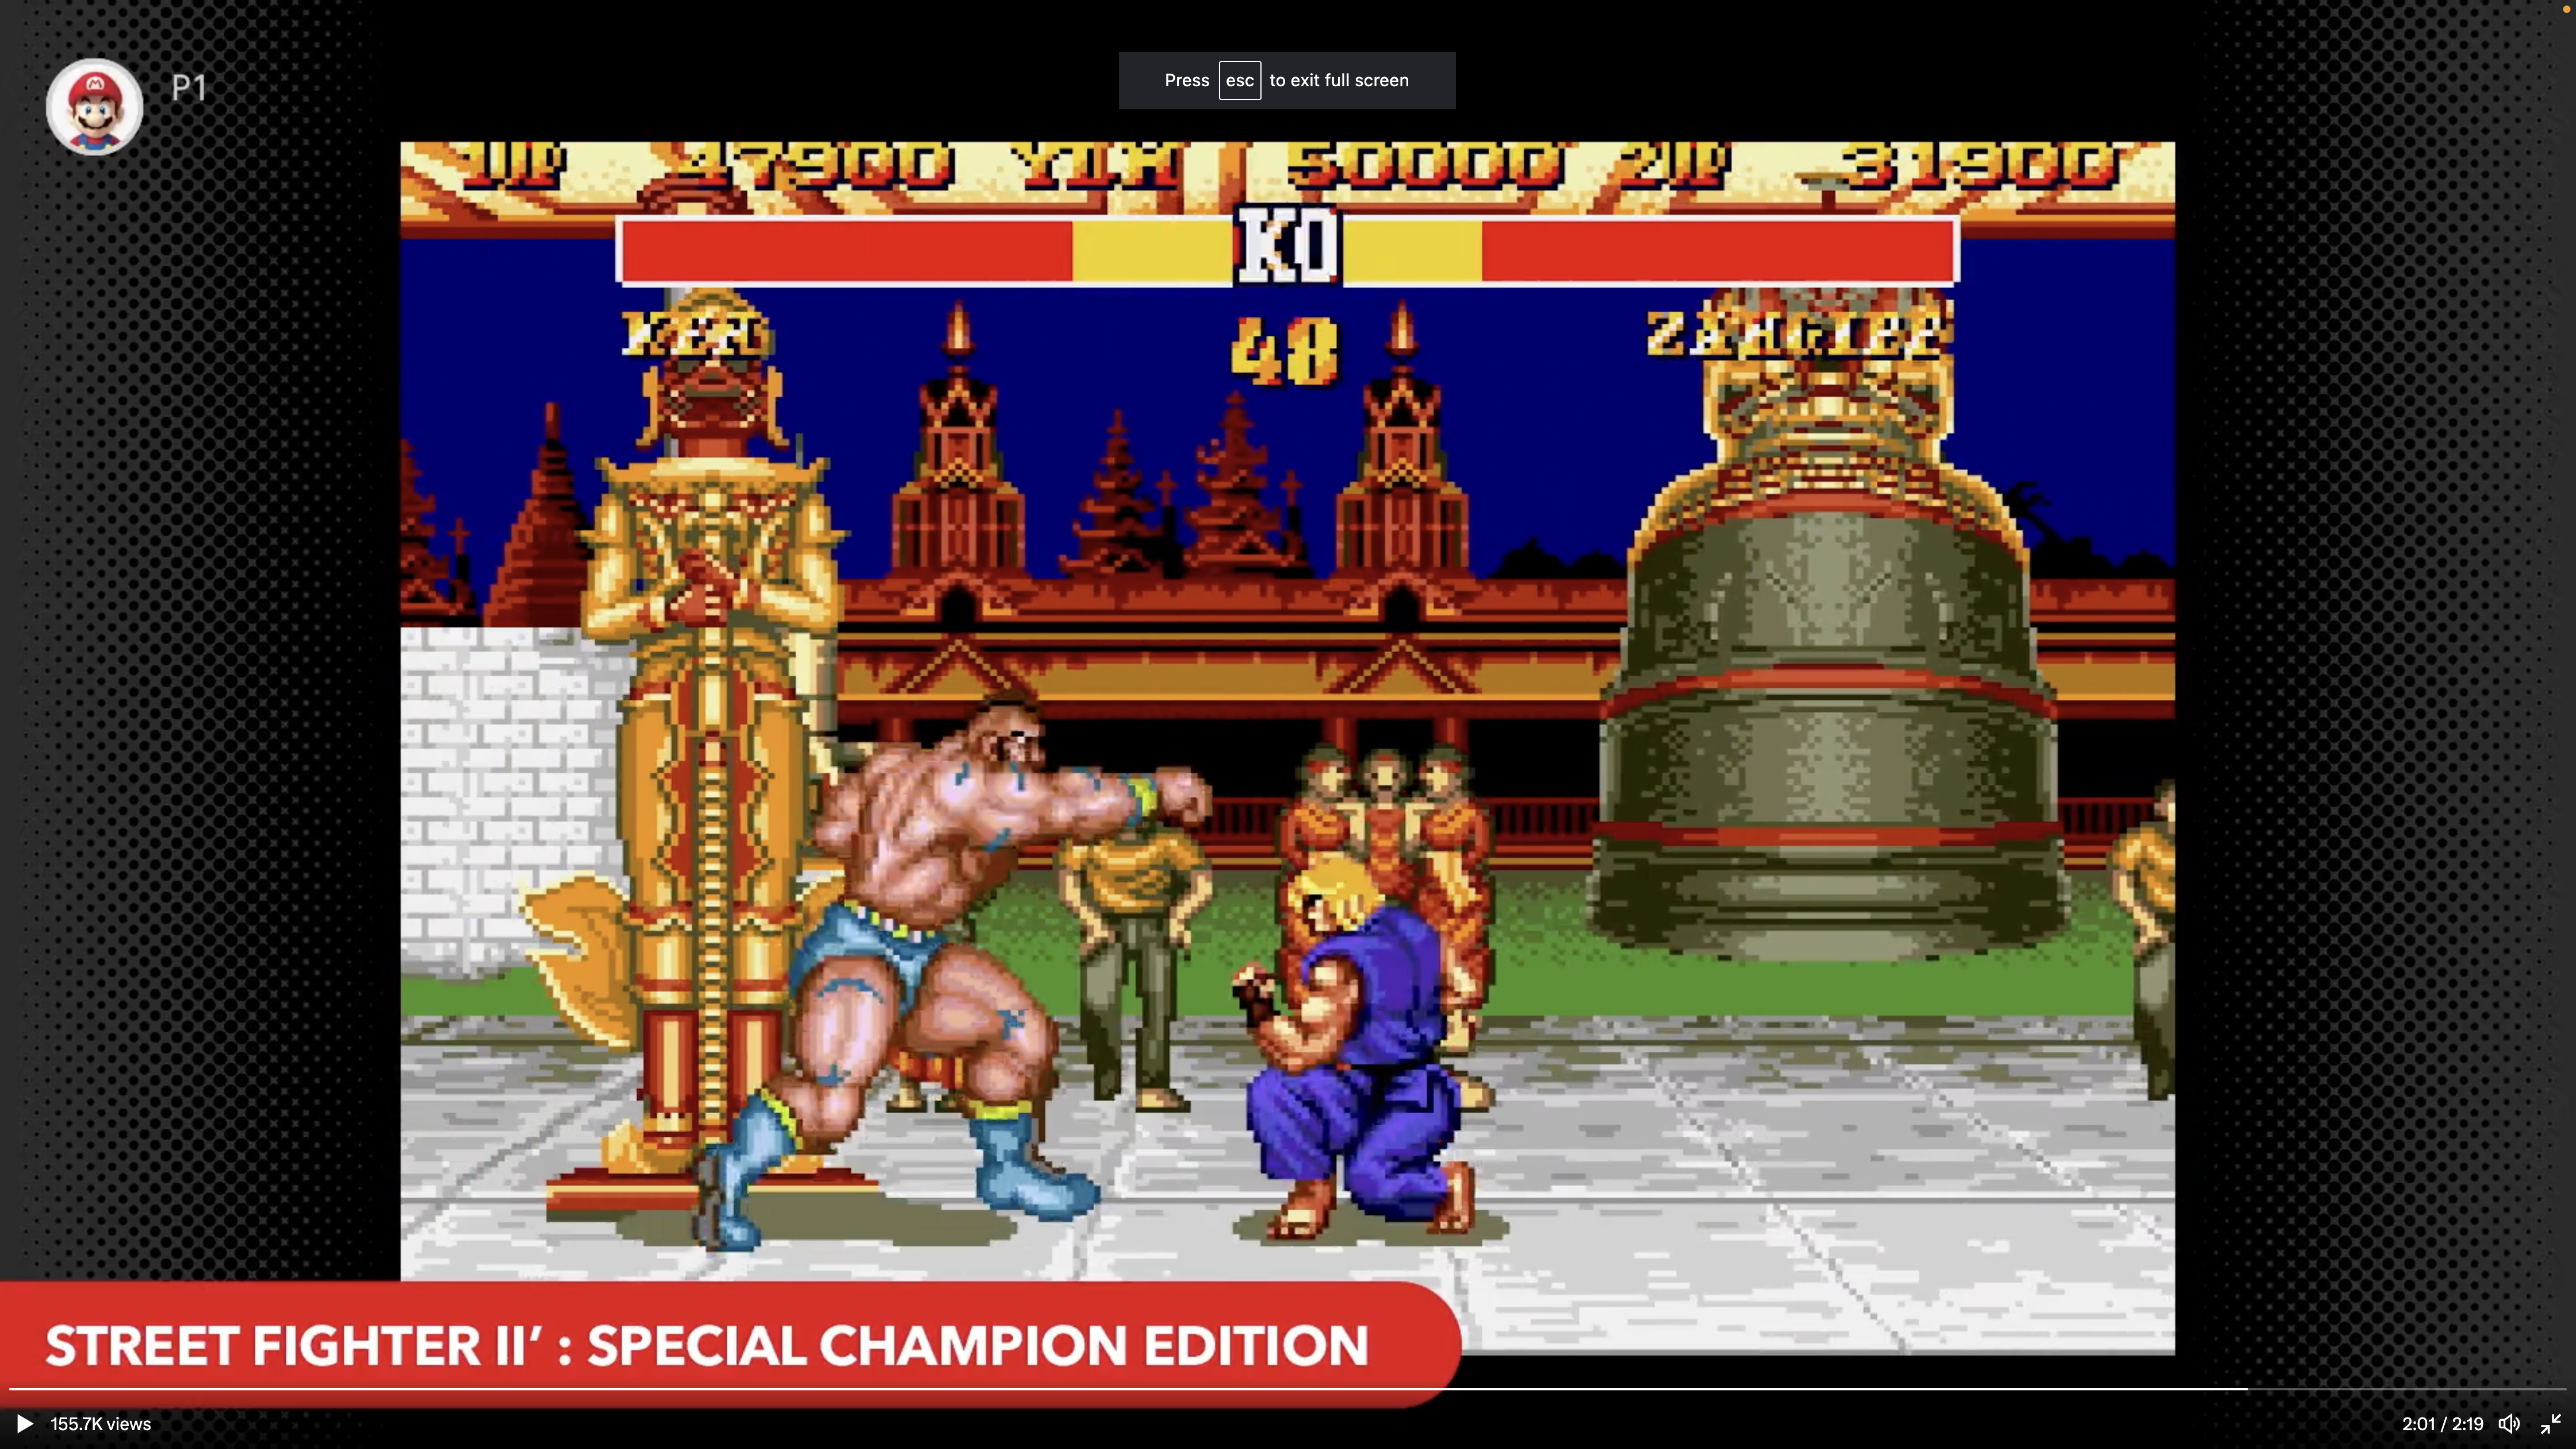 Screenshot of Super Street Fighter II': SPECIAL CHAMPION EDITION